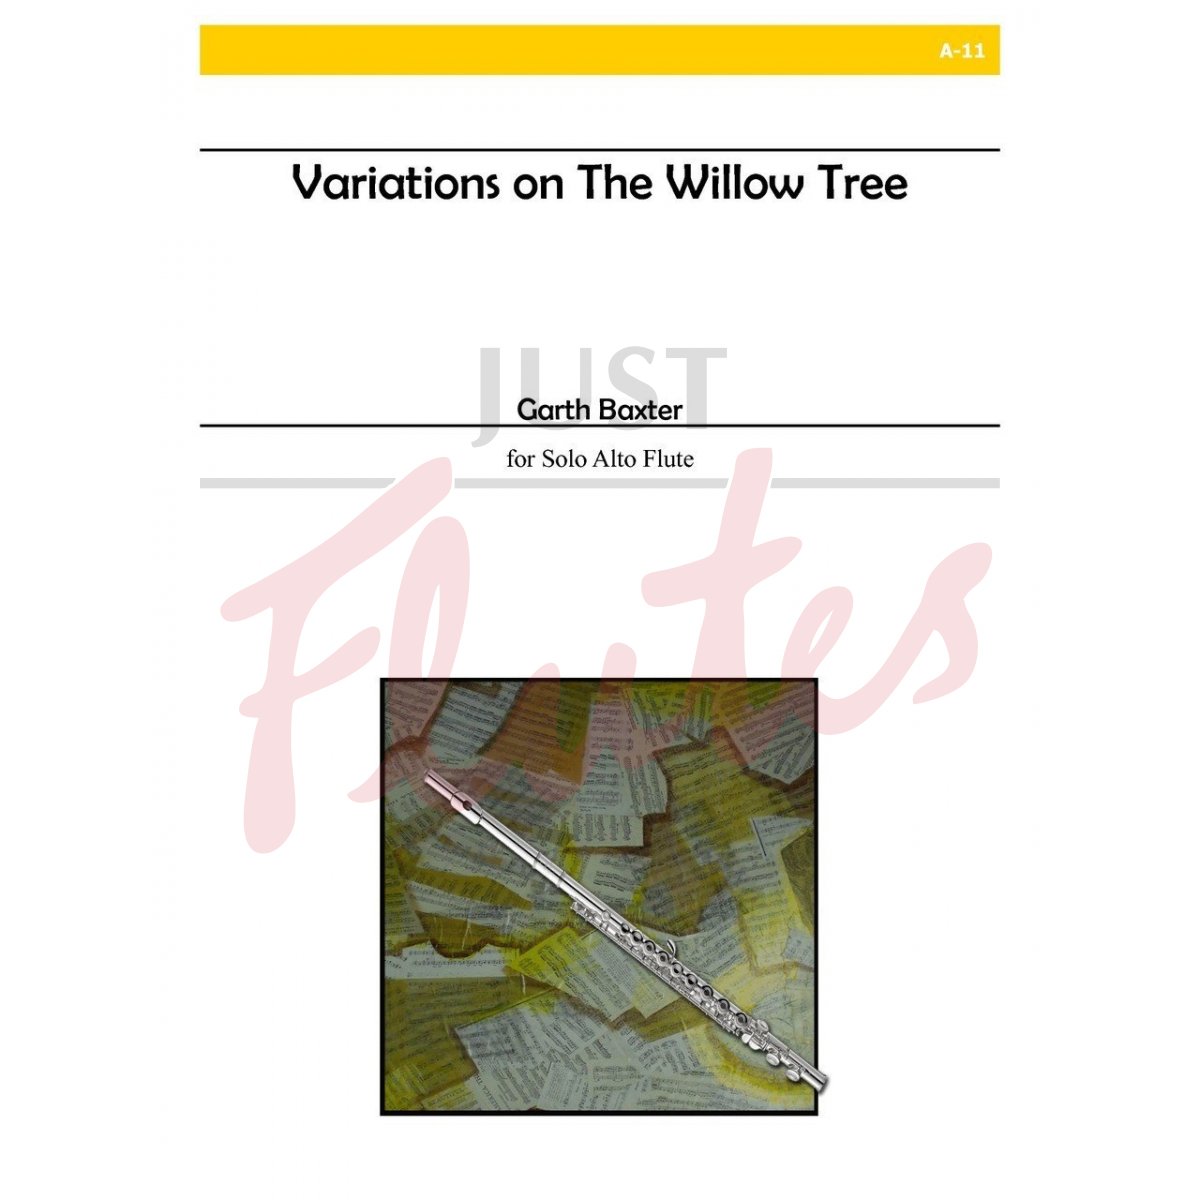 Variations on The Willow Tree for Solo Alto Flute